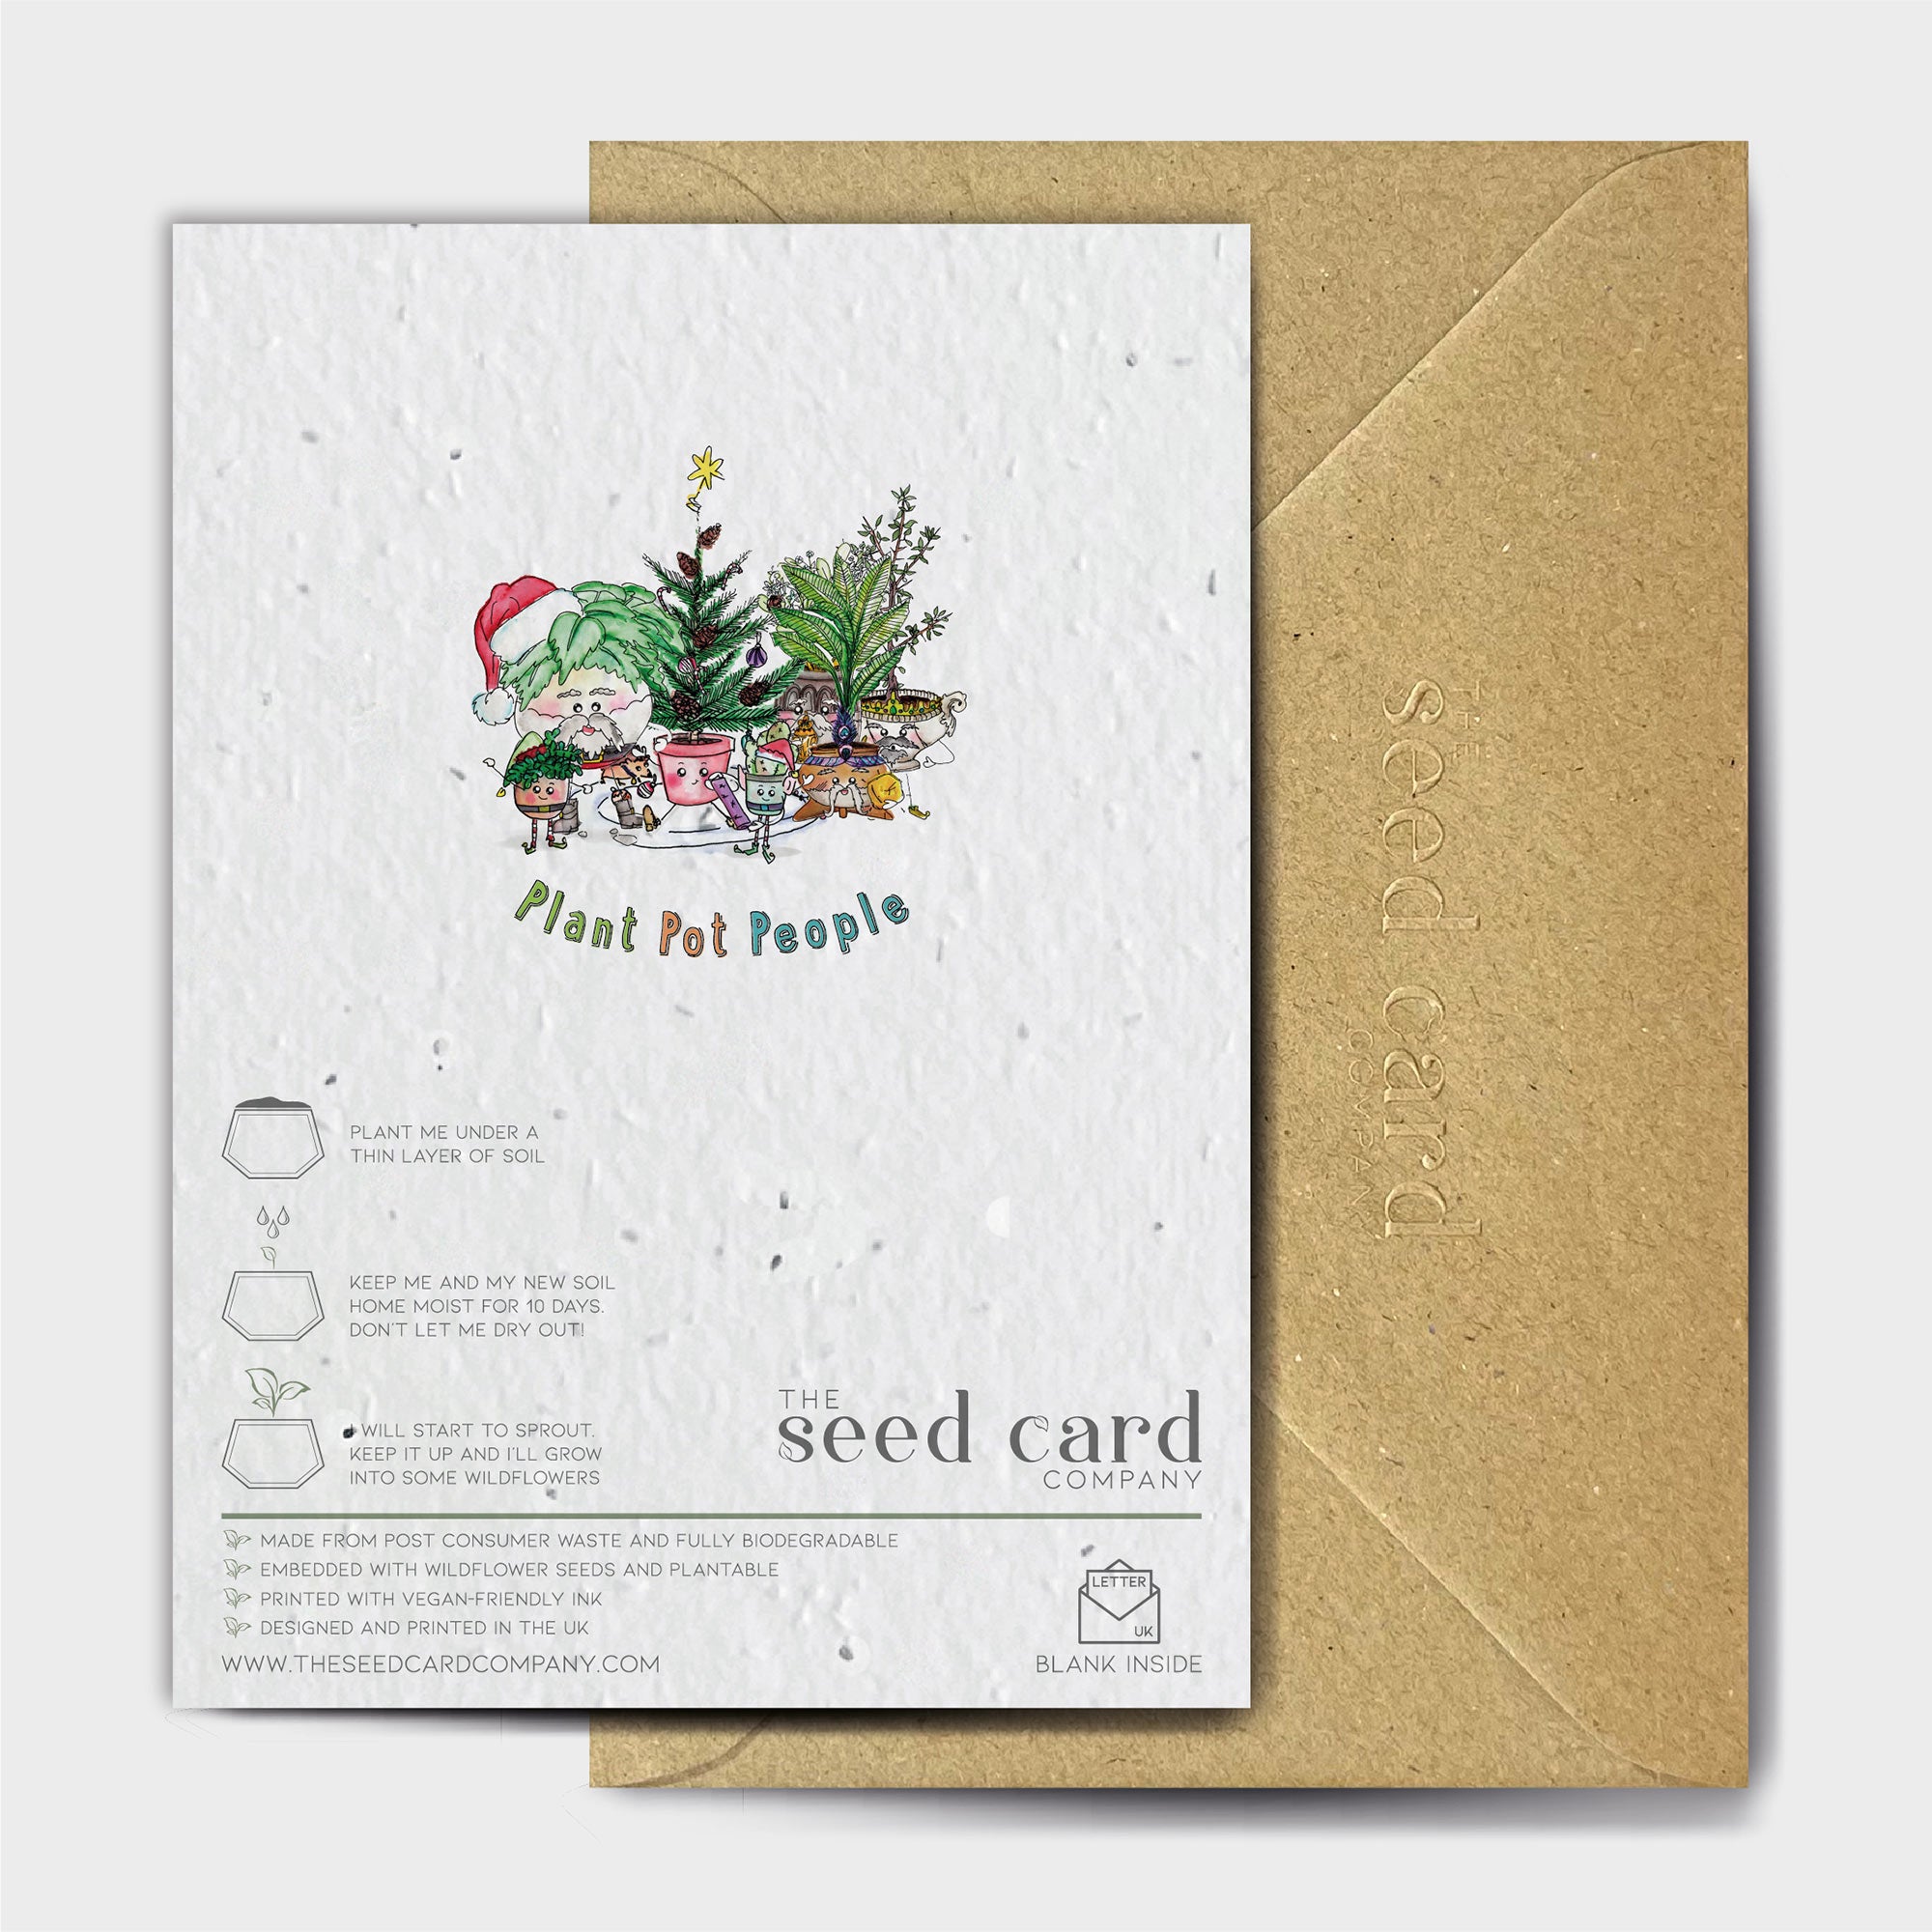 Shop online Catch That Carrot! - 100% biodegradable seed-embedded cards Shop -The Seed Card Company